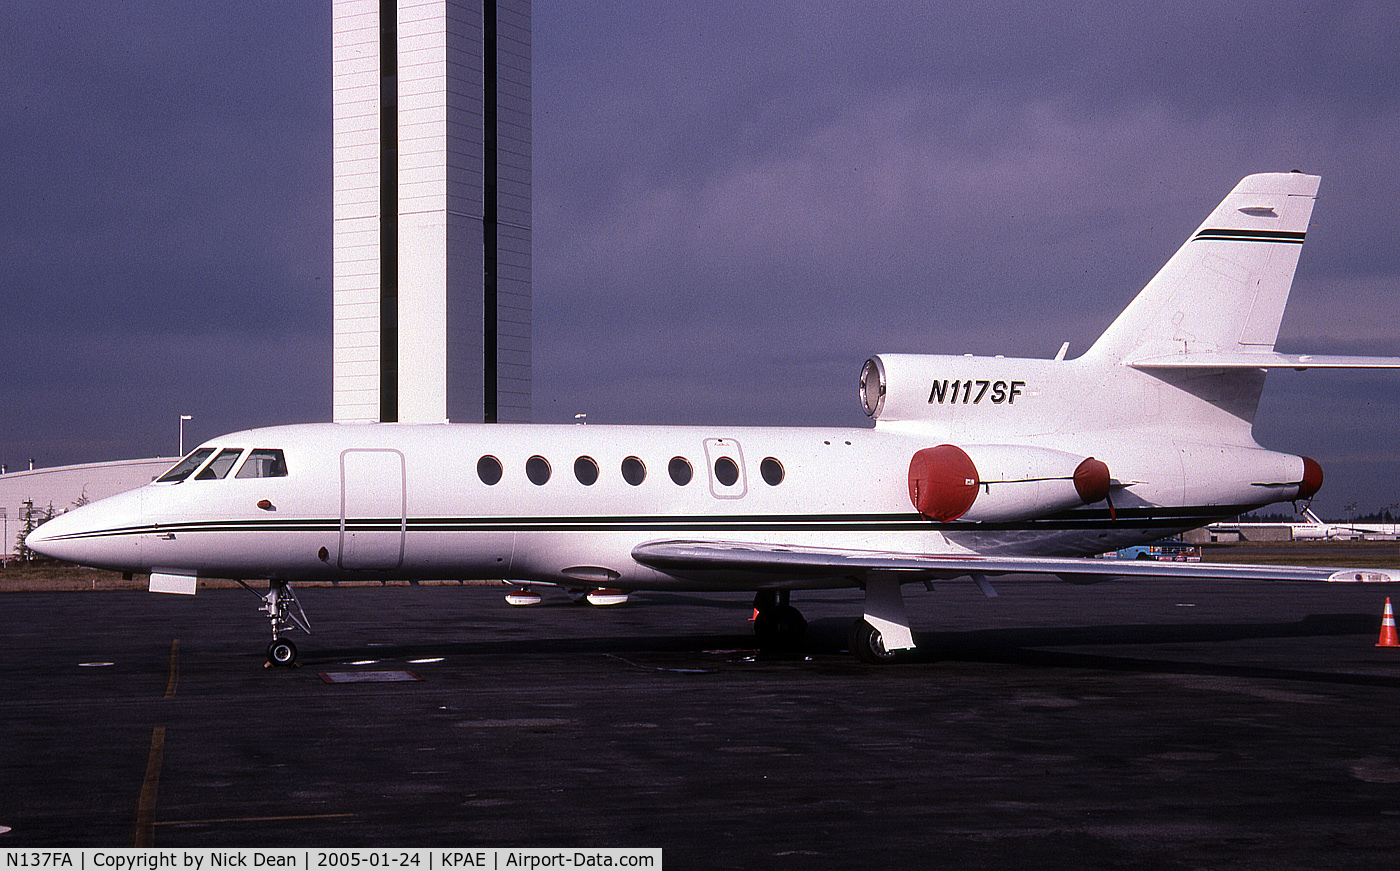 N137FA, 1983 Dassault Falcon 50 C/N 137, Seen here as N117SF of Seneca Foods this 50 is currently registered N137FA as posted